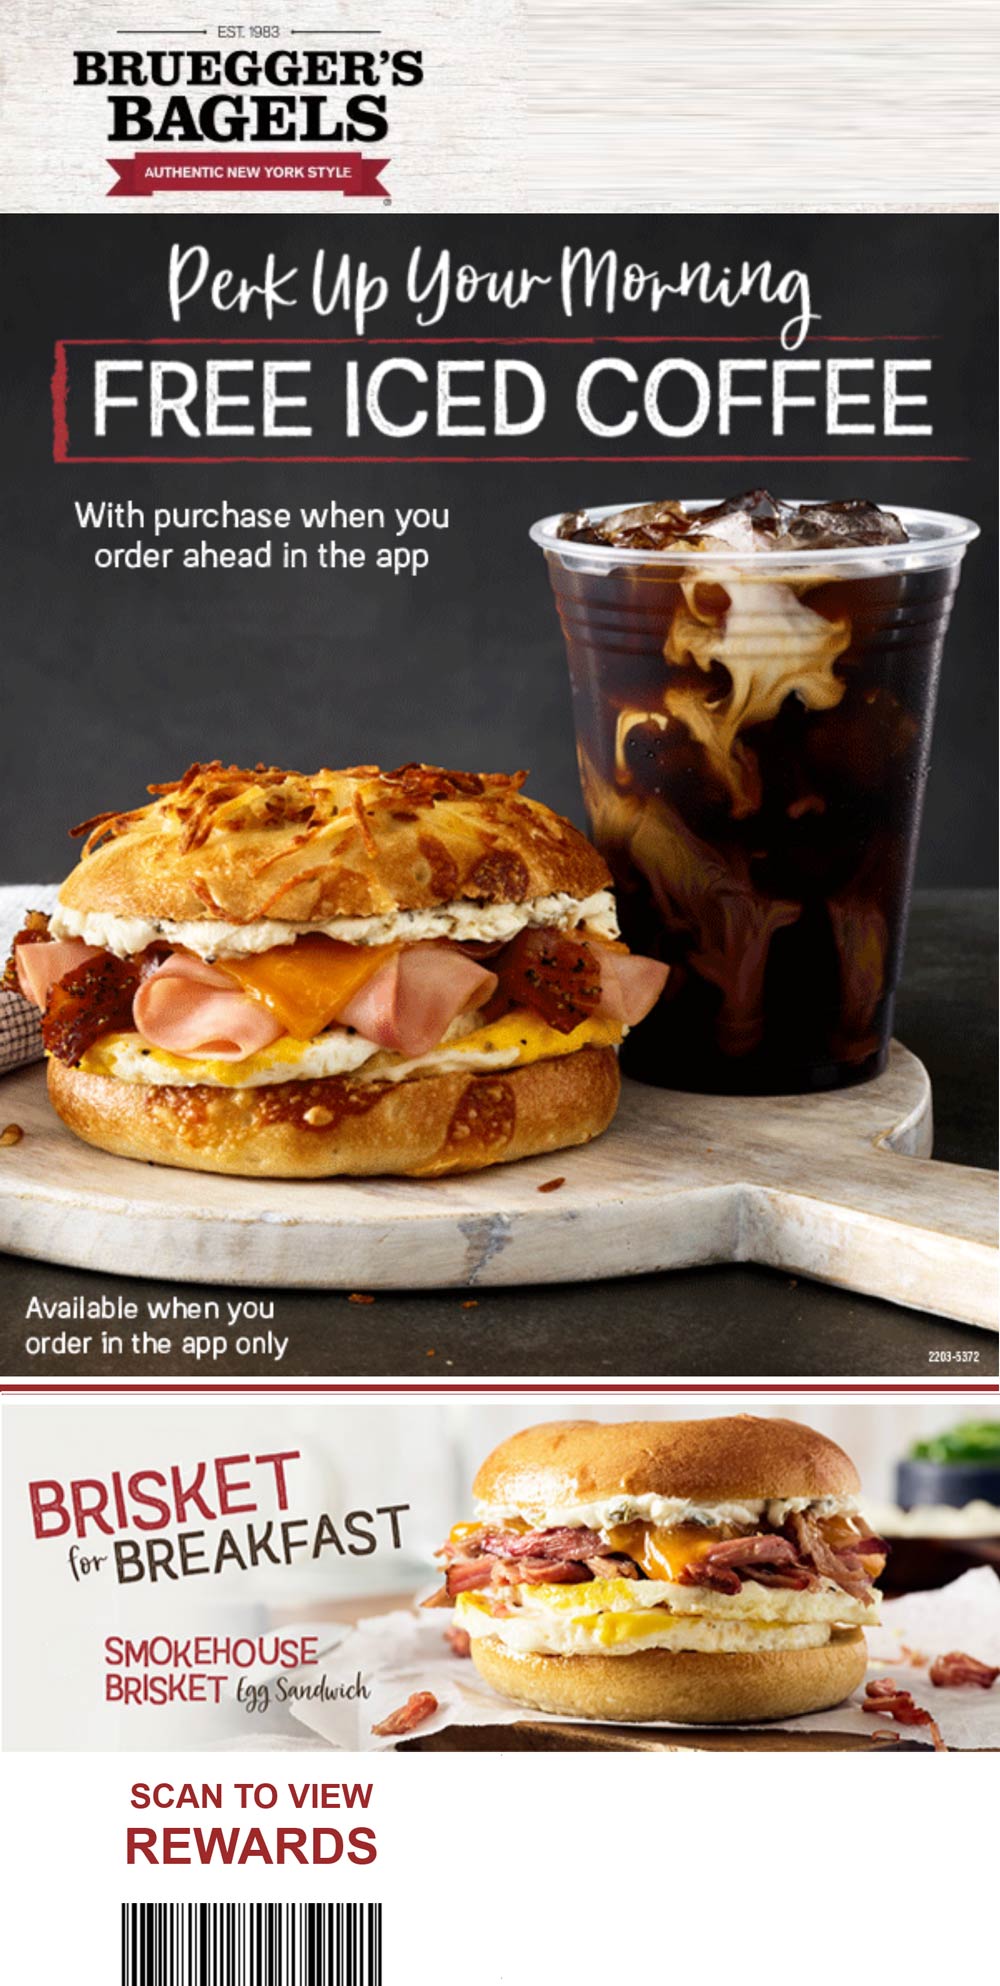 Brueggers Bagels restaurants Coupon  Free iced coffee with mobile orders at Brueggers Bagels #brueggersbagels 